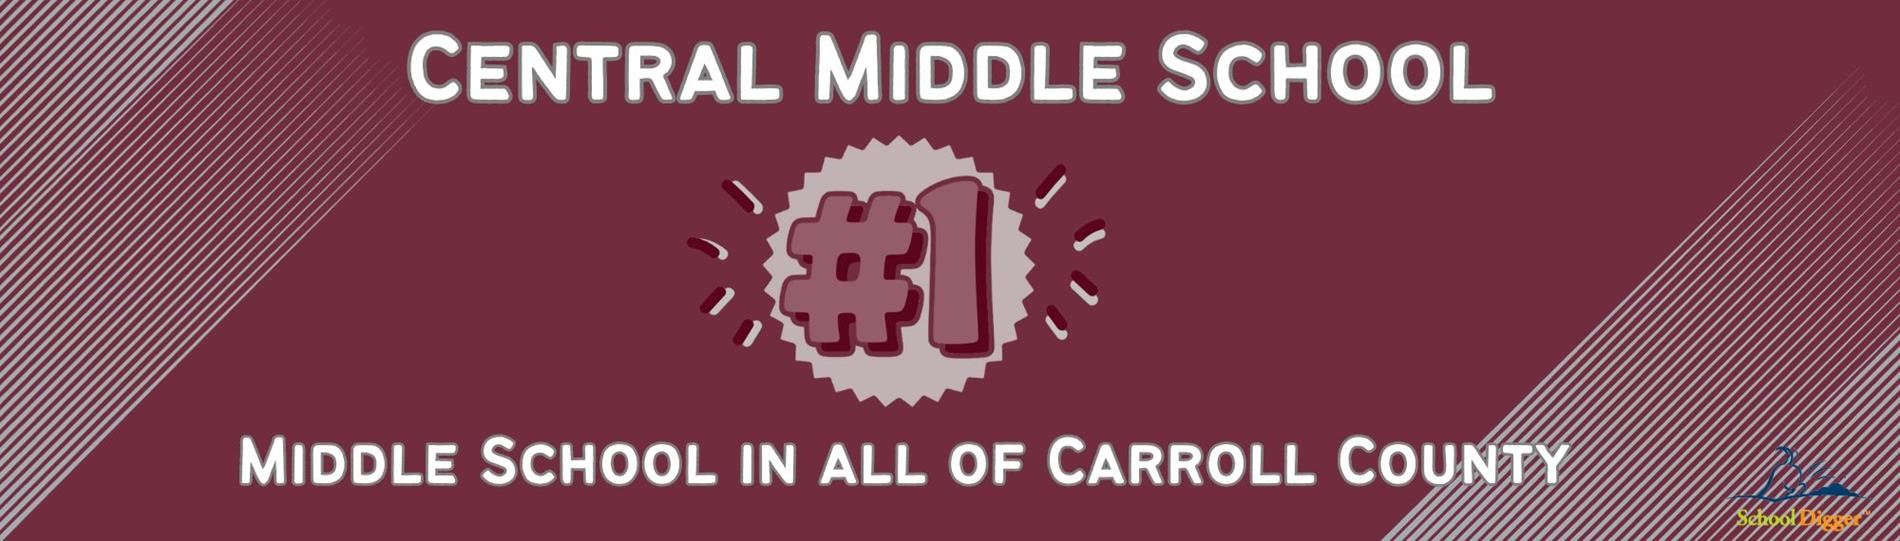 CMS #1 Ranked middle school in all of carroll county